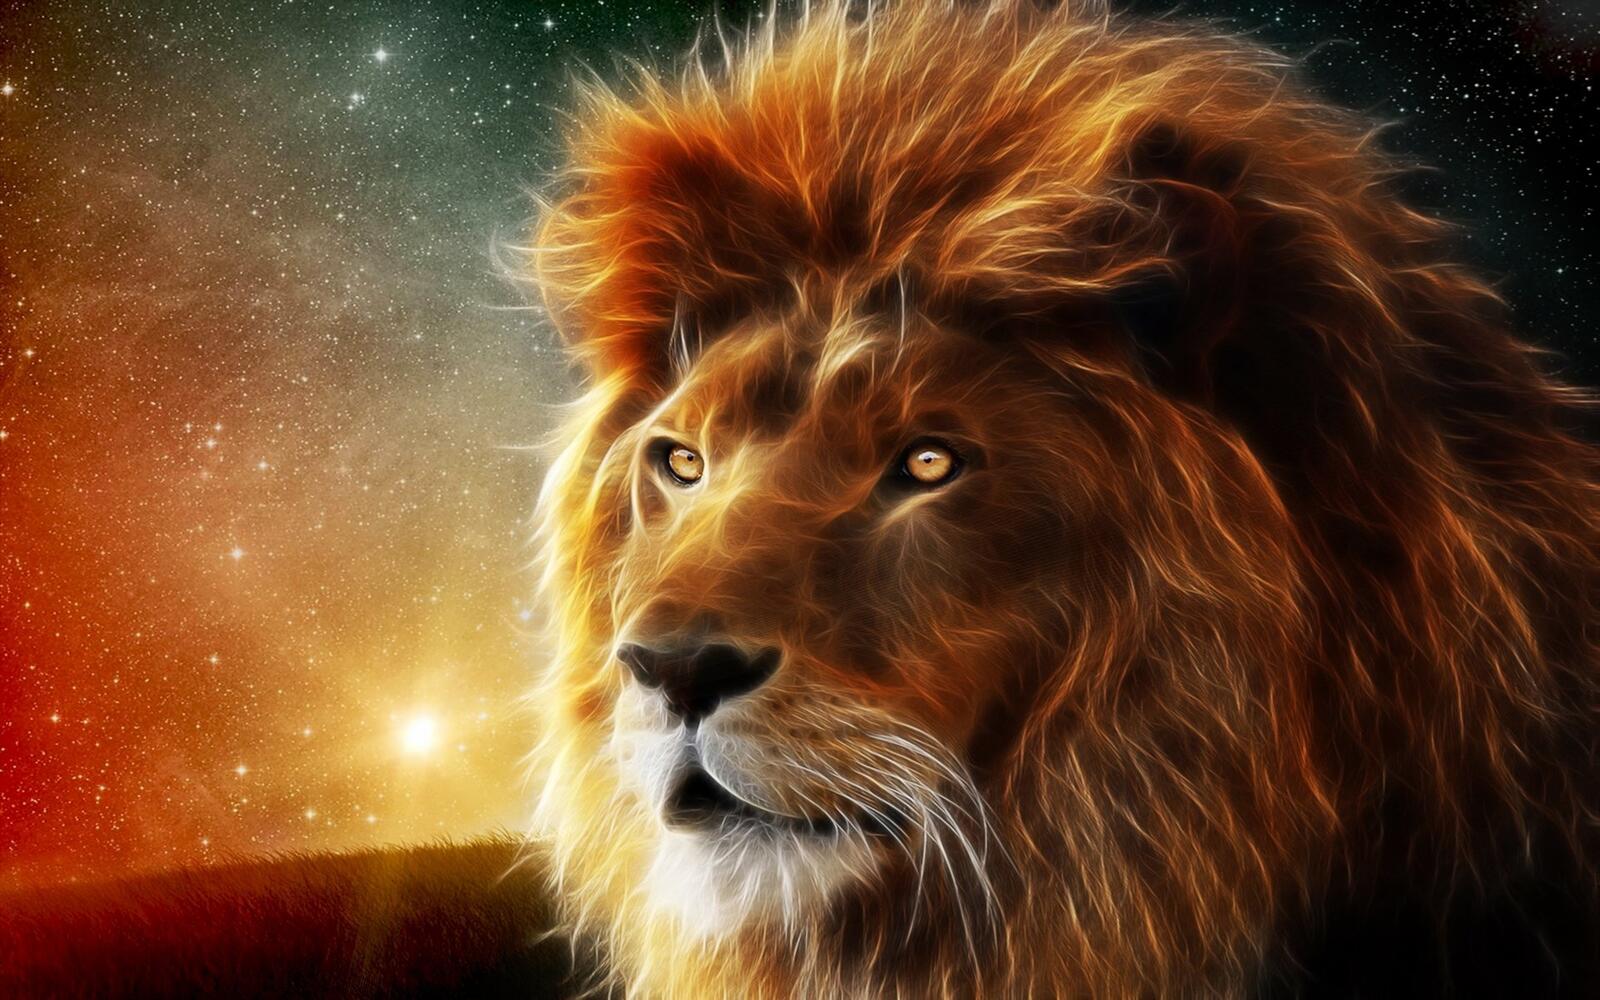 Free photo A drawing of a lion against a starry sky